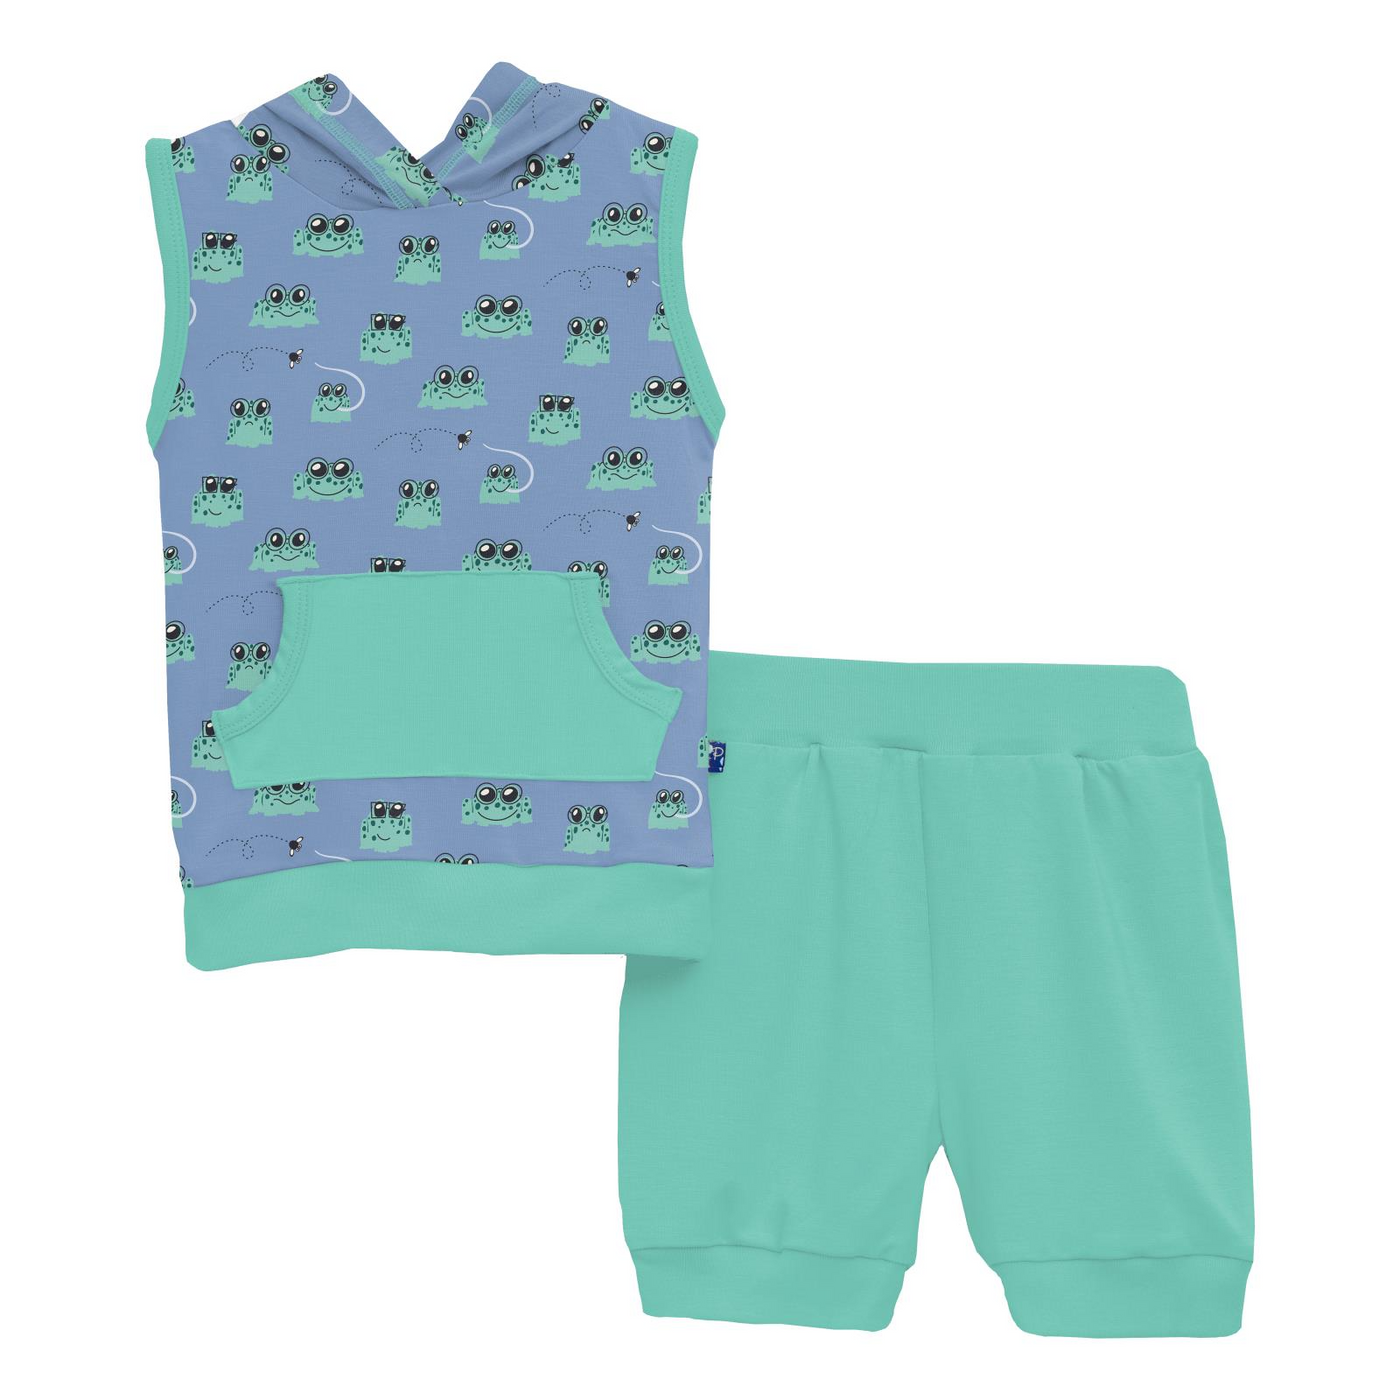 Kickee Pants Short Sleeve Hoodie Tank Outfit Set: Dream Blue Bespeckled Frogs  (Ships 5/15-6/15)